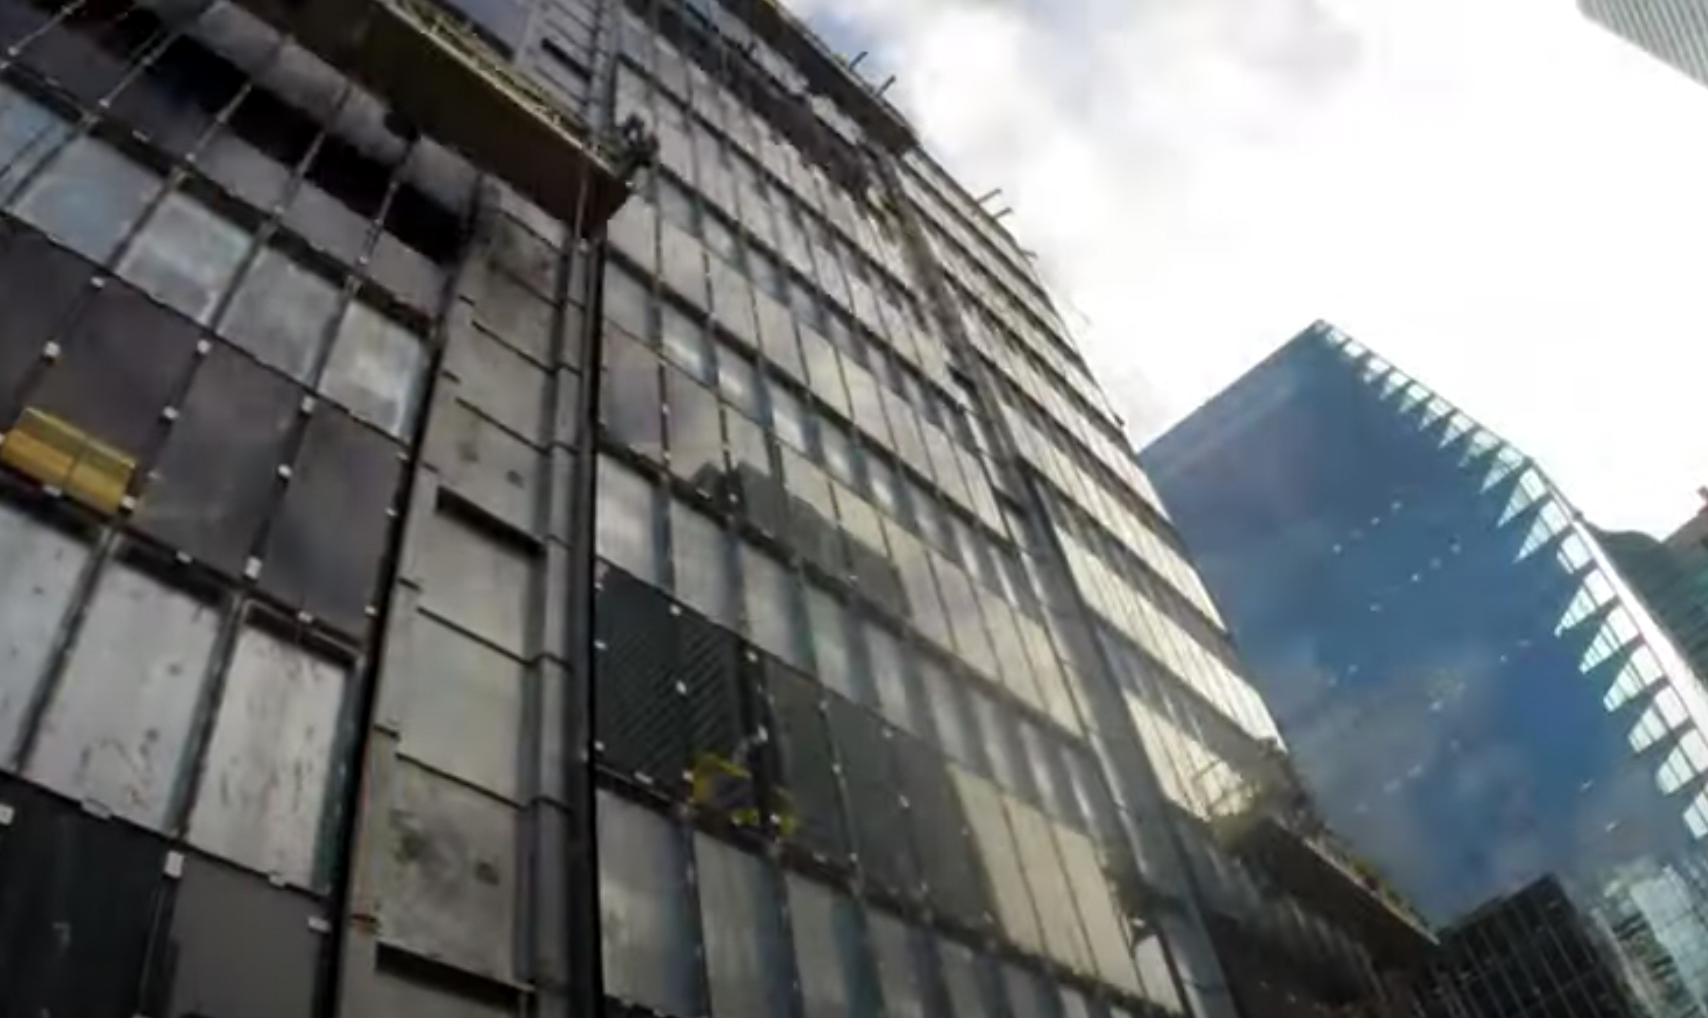 Removal of exterior cladding from 120 Adelaide and 130 Adelaide towers